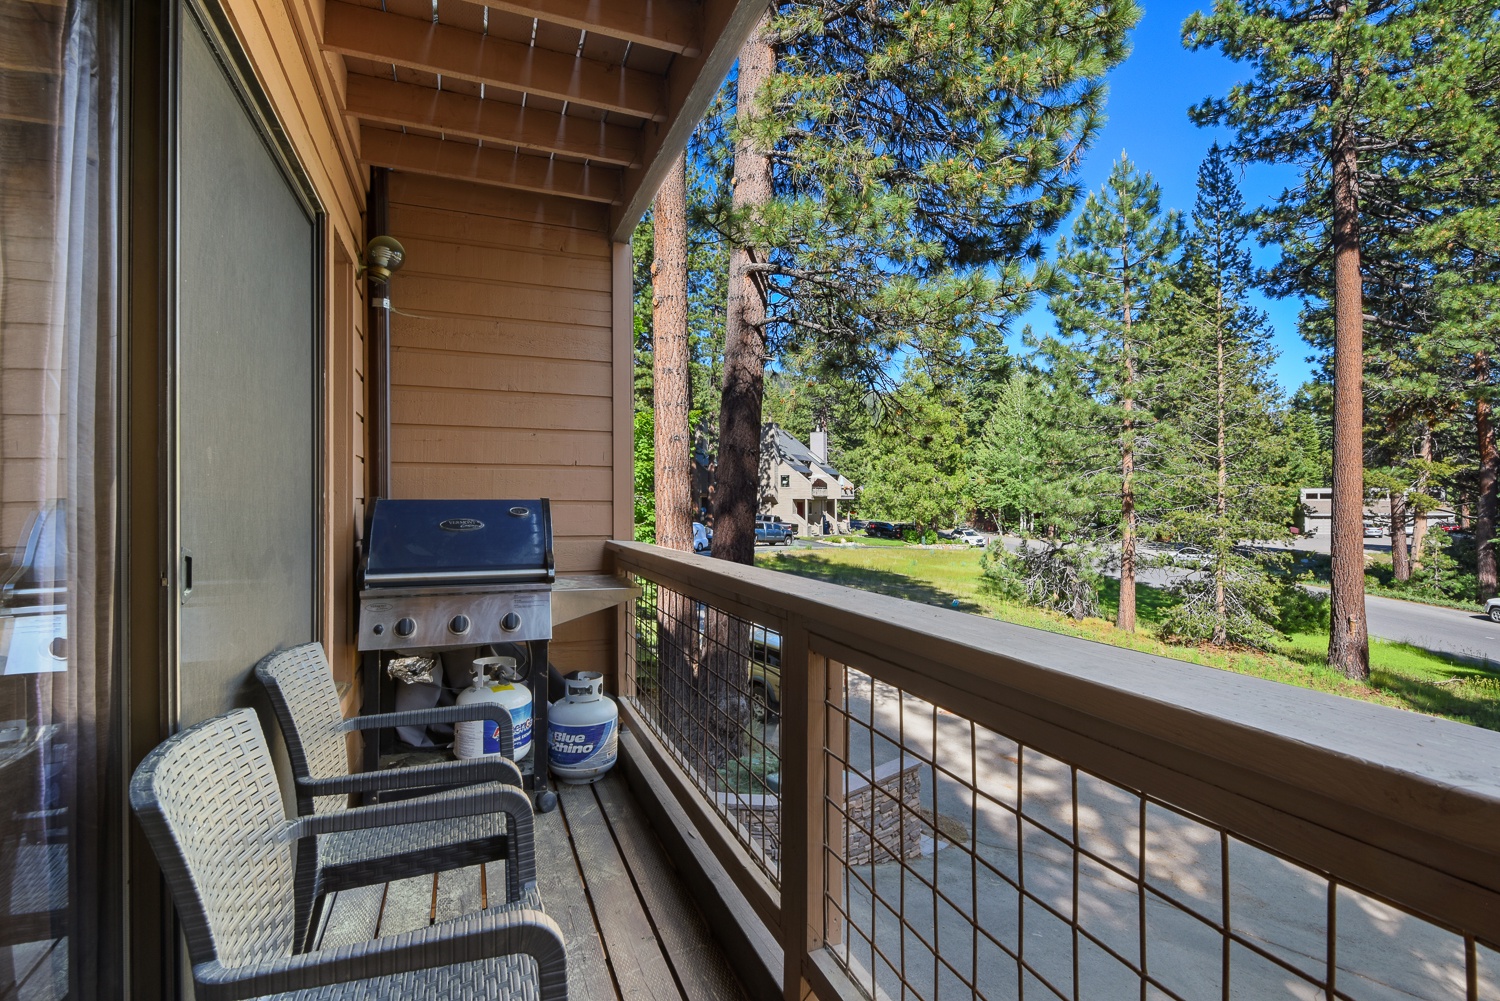 Kick back and relax or grill up a feast on the 2nd level deck